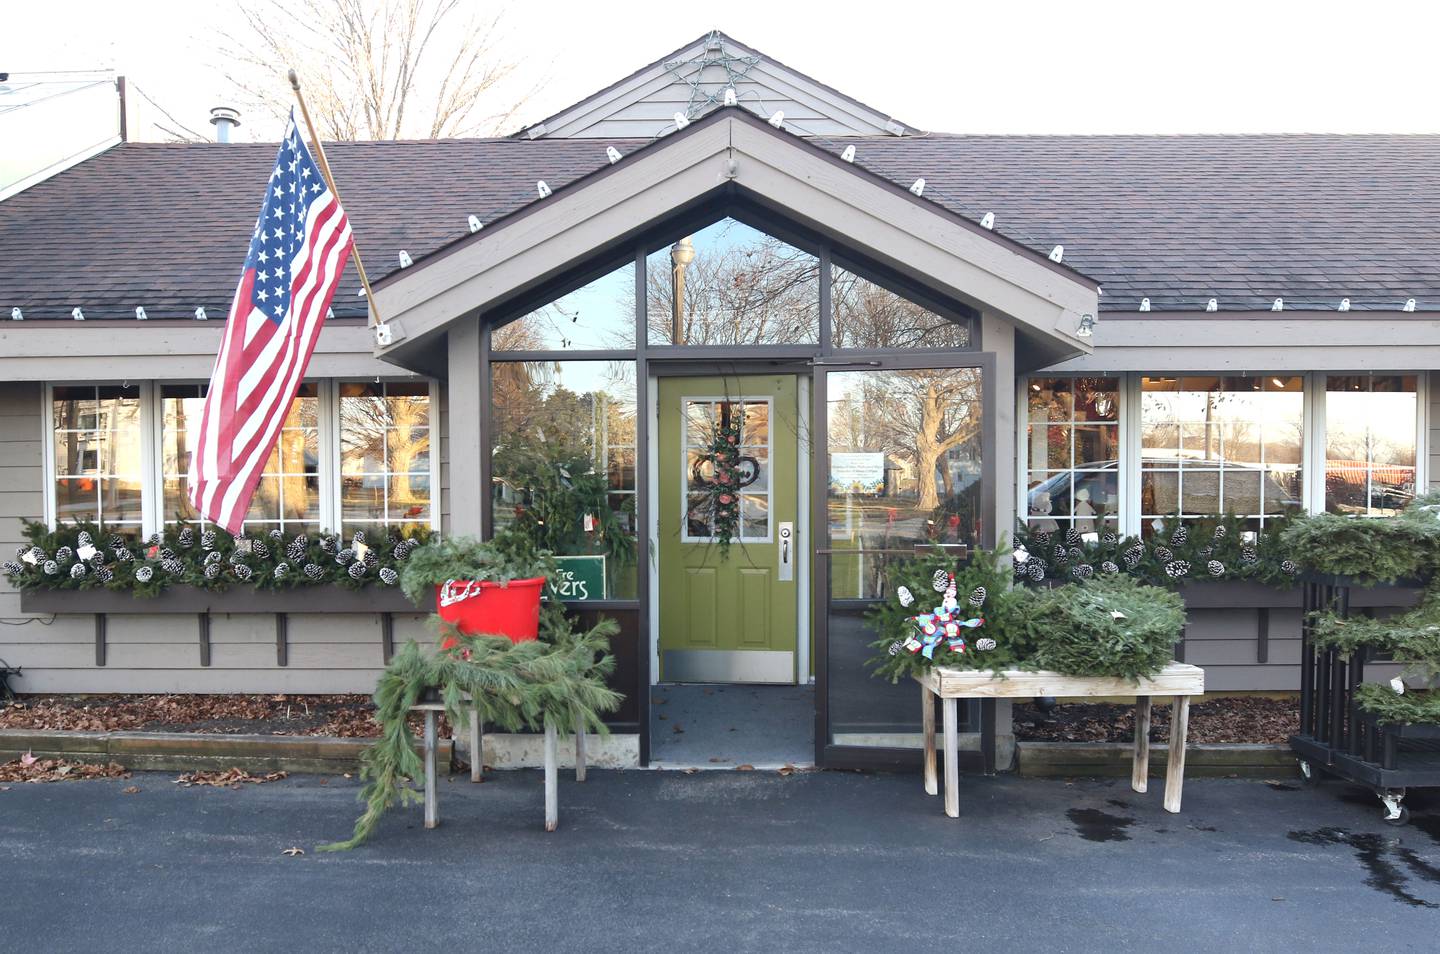 Kar-Fre Flowers in Sycamore is ready for shoppers this holiday season.